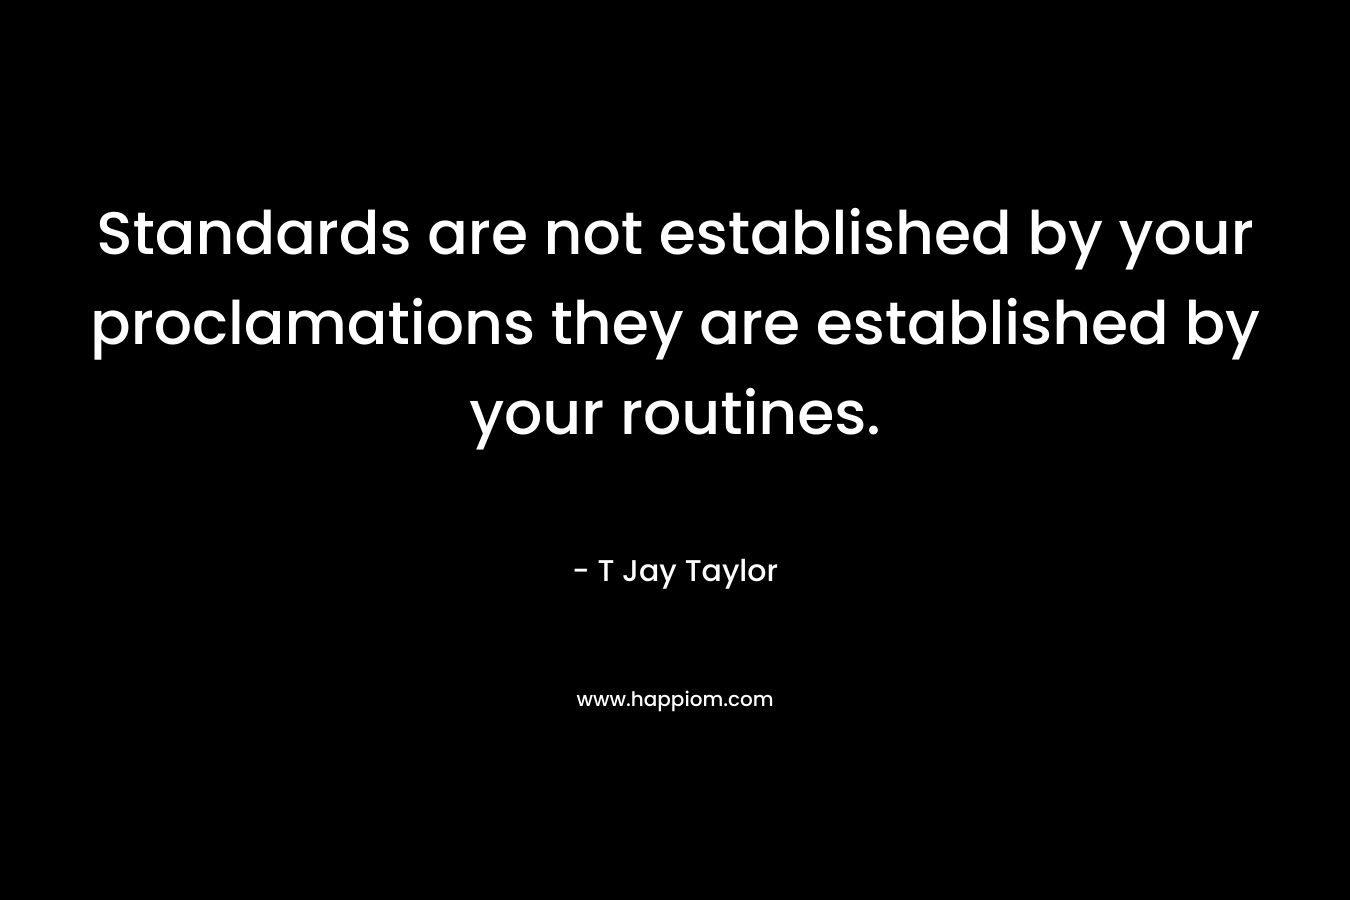 Standards are not established by your proclamations they are established by your routines. – T Jay Taylor